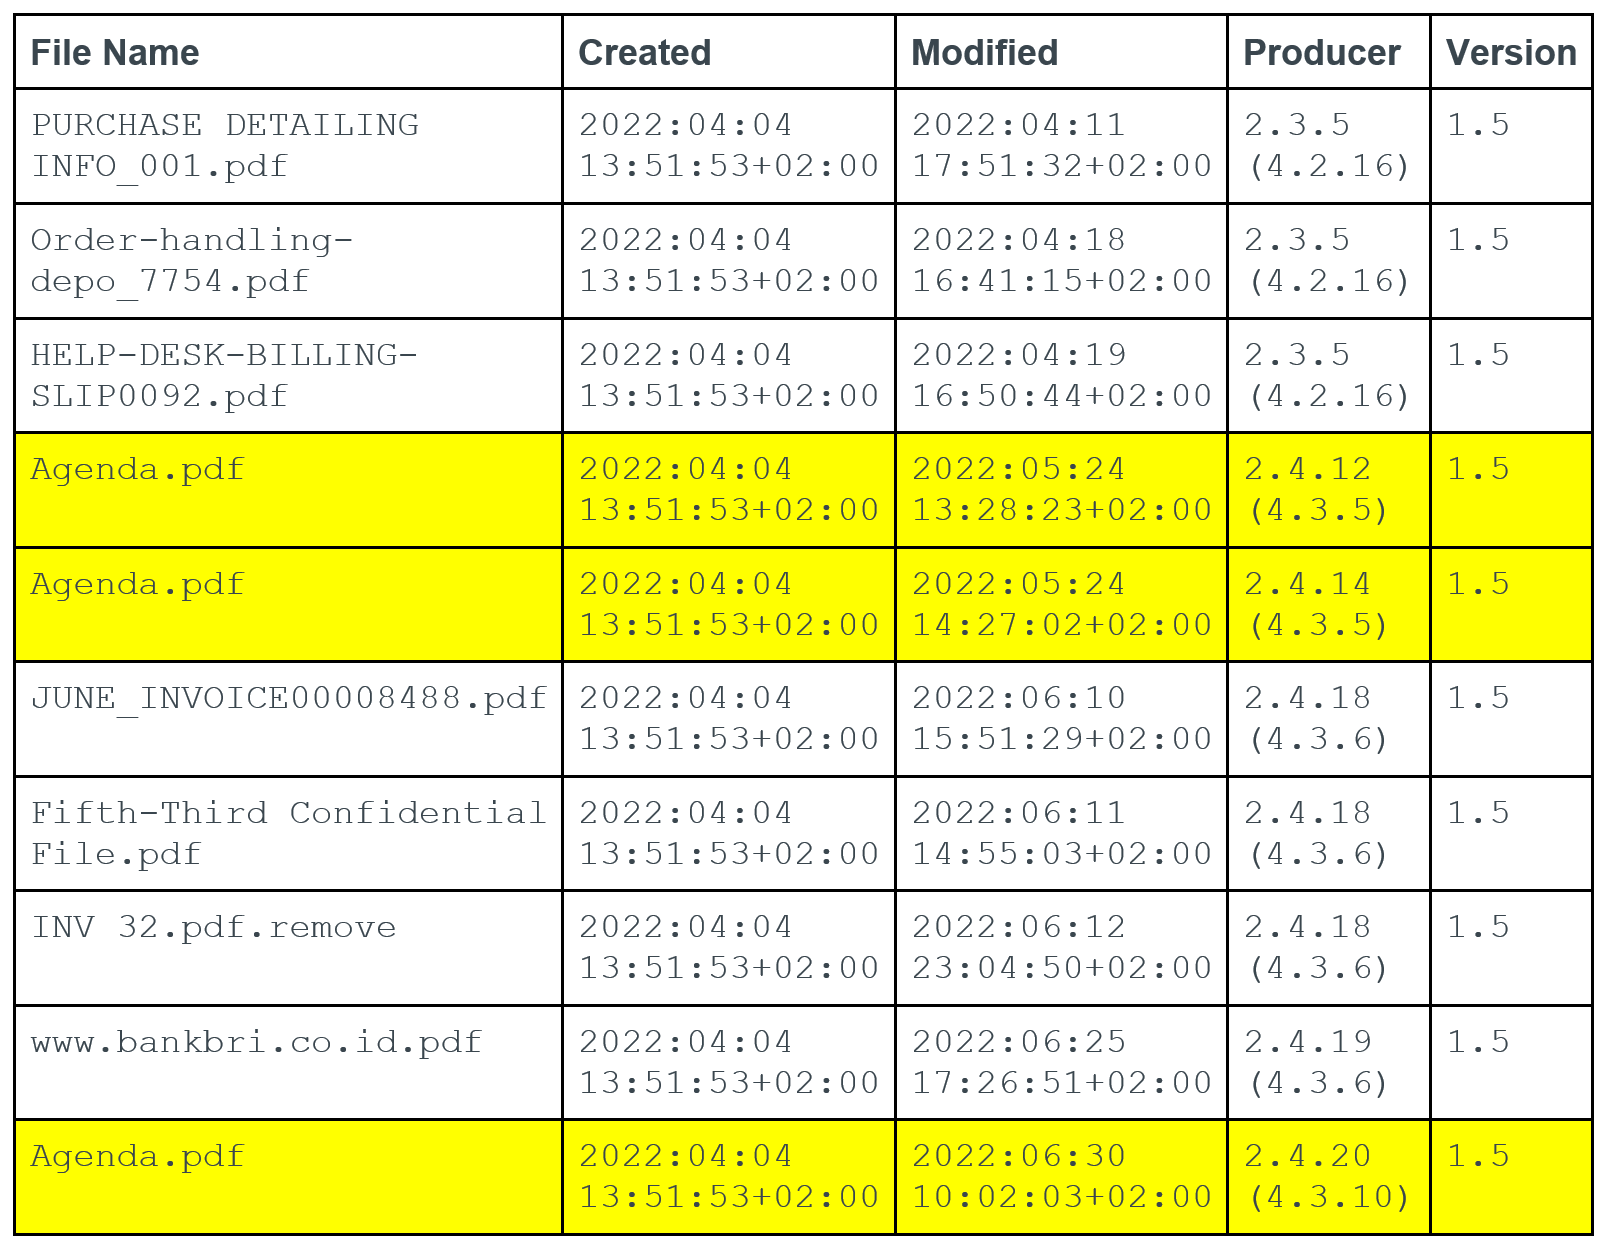 The table image shows file names, dates created and modified, producer and version. The files in the table were found by pivoting on the metadata in the two agenda.pdf samples discussed earlier. The highlighted rows show how this effort revealed a third Agenda.pdf file that we could then examine for additional Cloaked Ursa activity. 